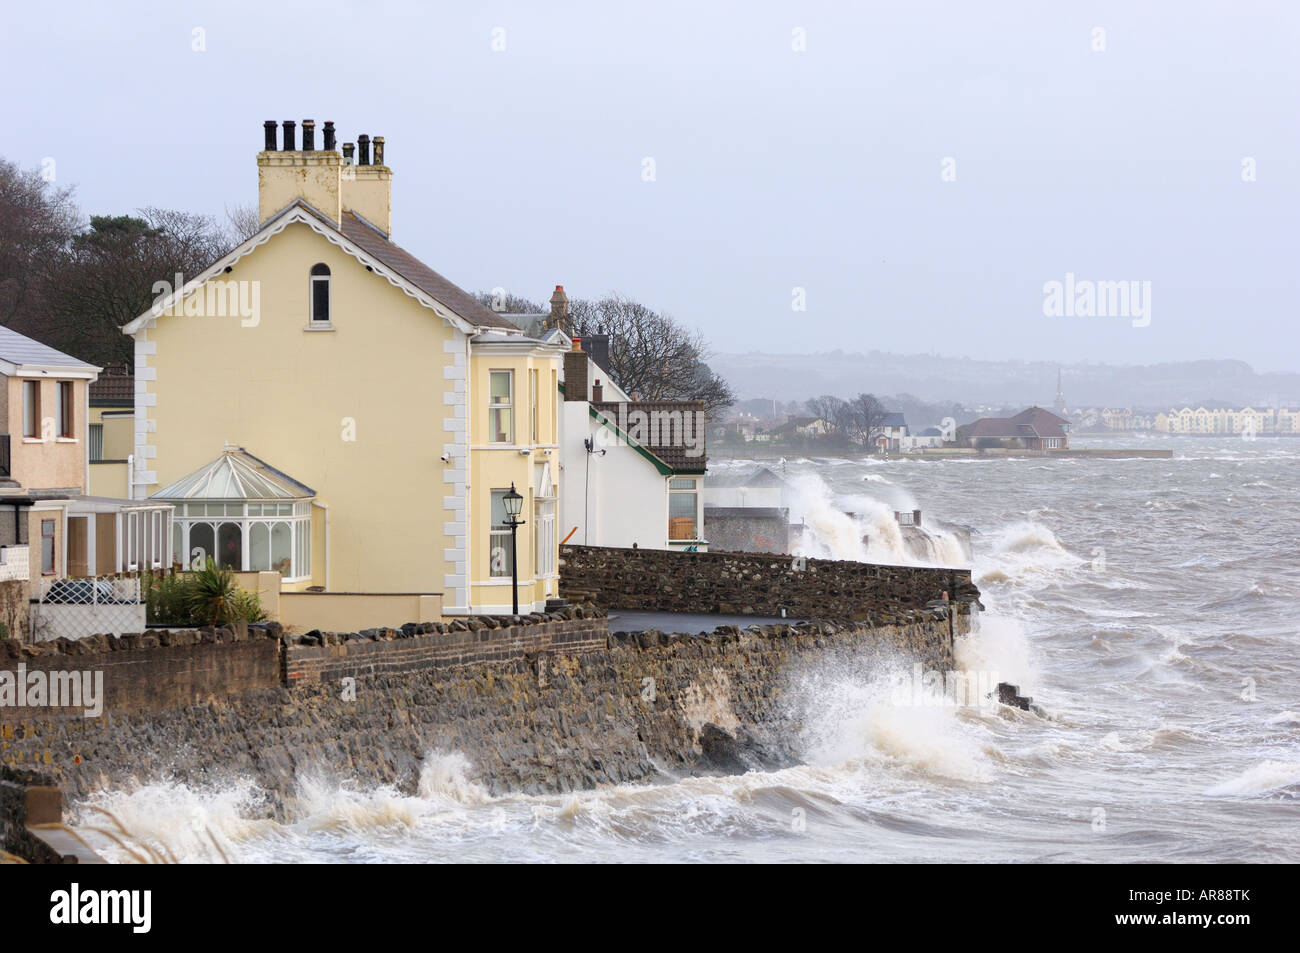 Waves break over a wall in belfast lough during a winter storm Stock Photo